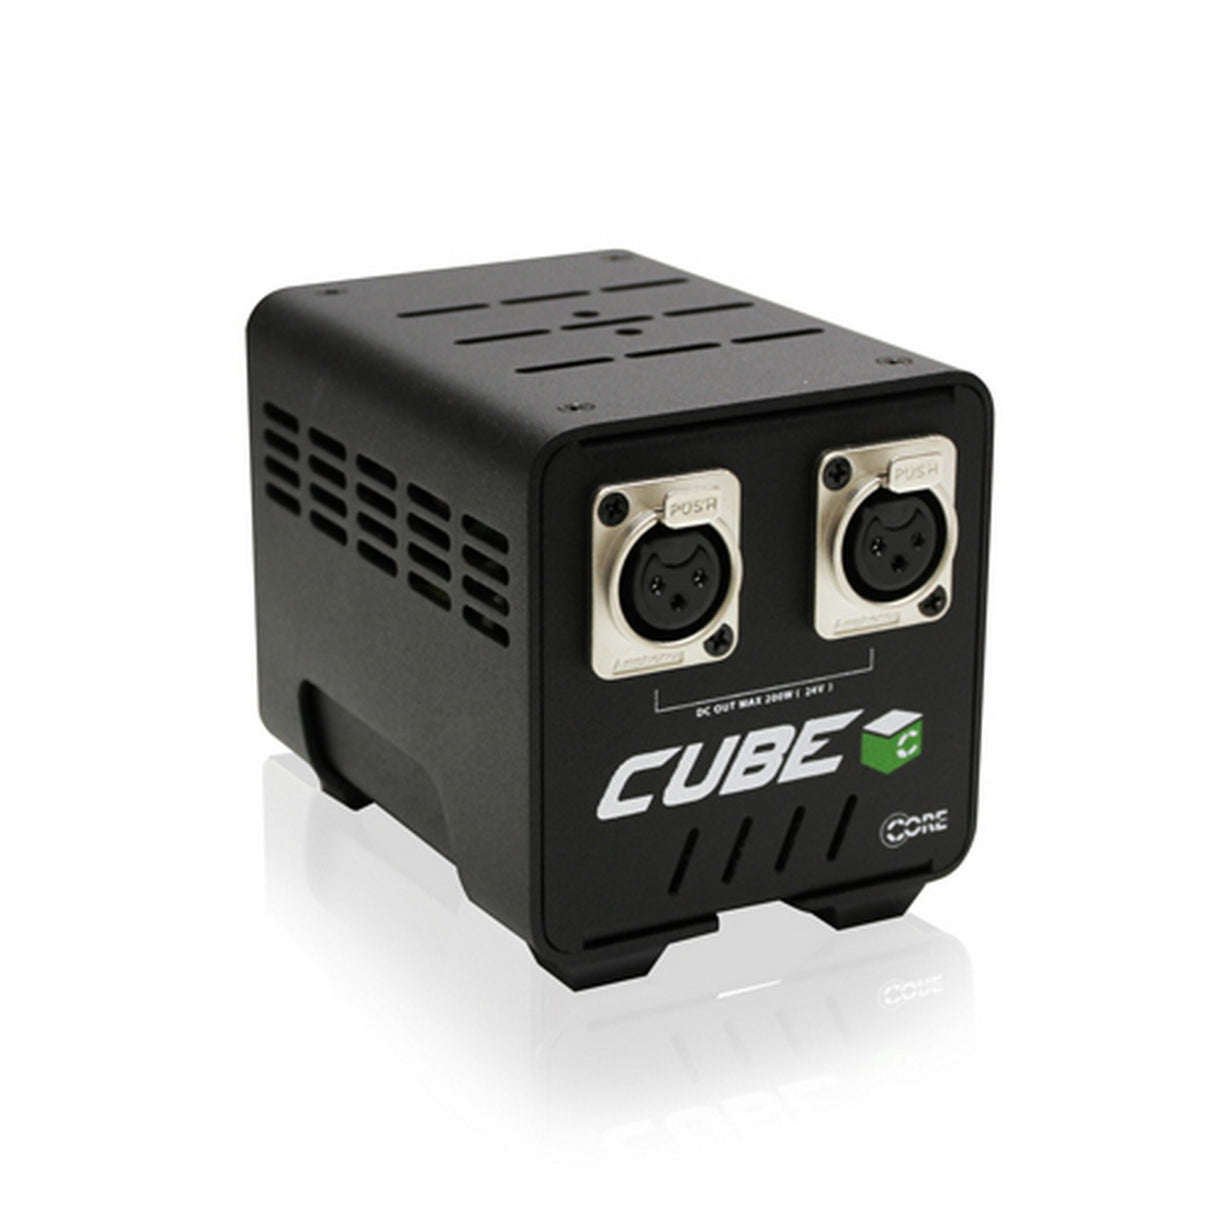 Core SWX Cube 24 Lightweight 24V Aluminum 200W Industrial Power Supply